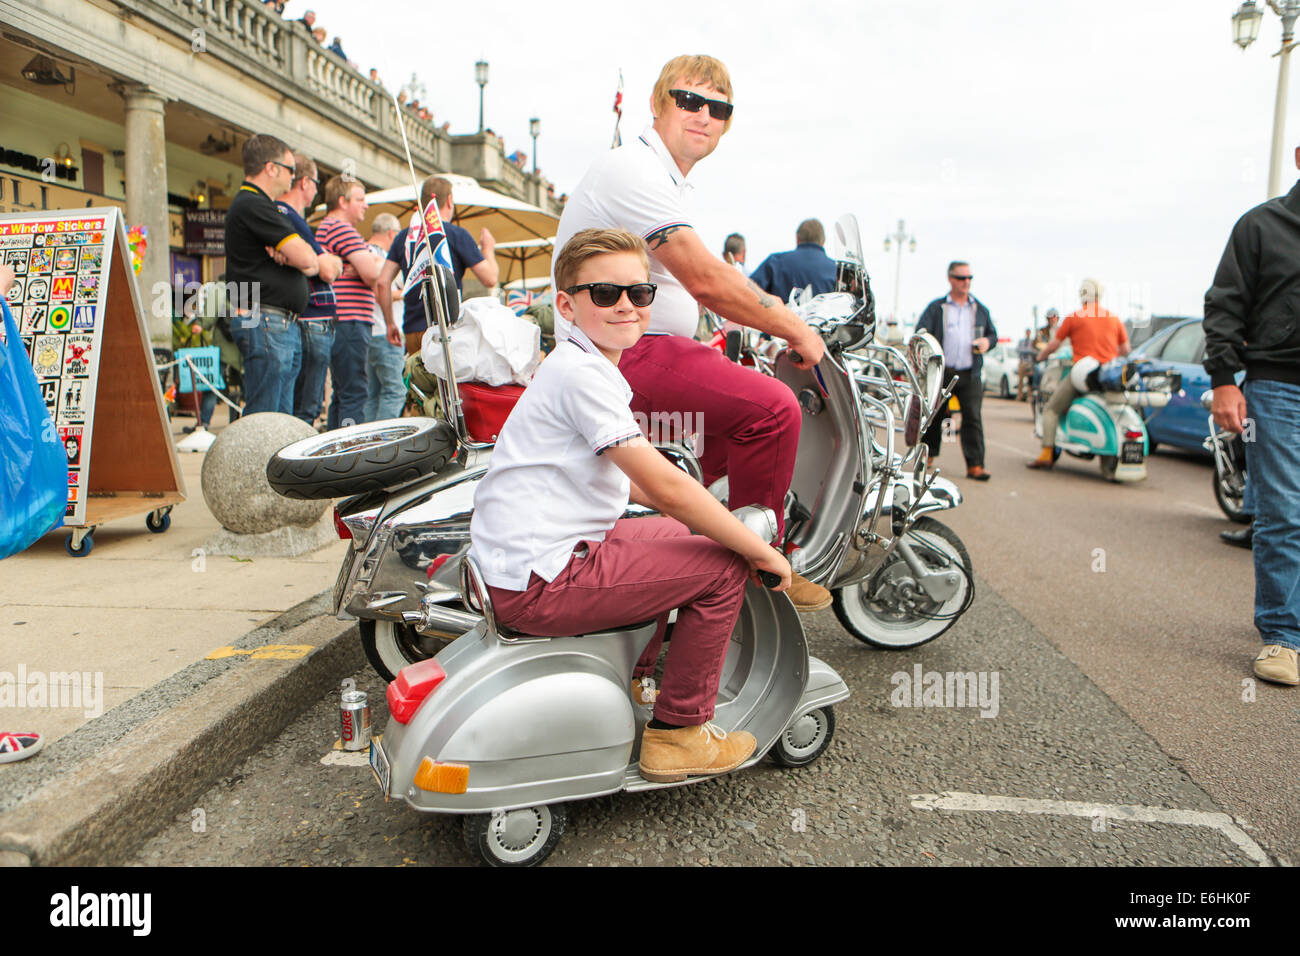 Mod All Weekender, Brighton 2014, Madeira Drive, Brighton, East Sussex, UK  . This is a gathering of British Mod culture annual event on the south coast of England with the classic scooter as the chosen mode of transport. Participants in the scooter run to Beachy Head on Sunday afternoon. 24th August 2014 Stock Photo